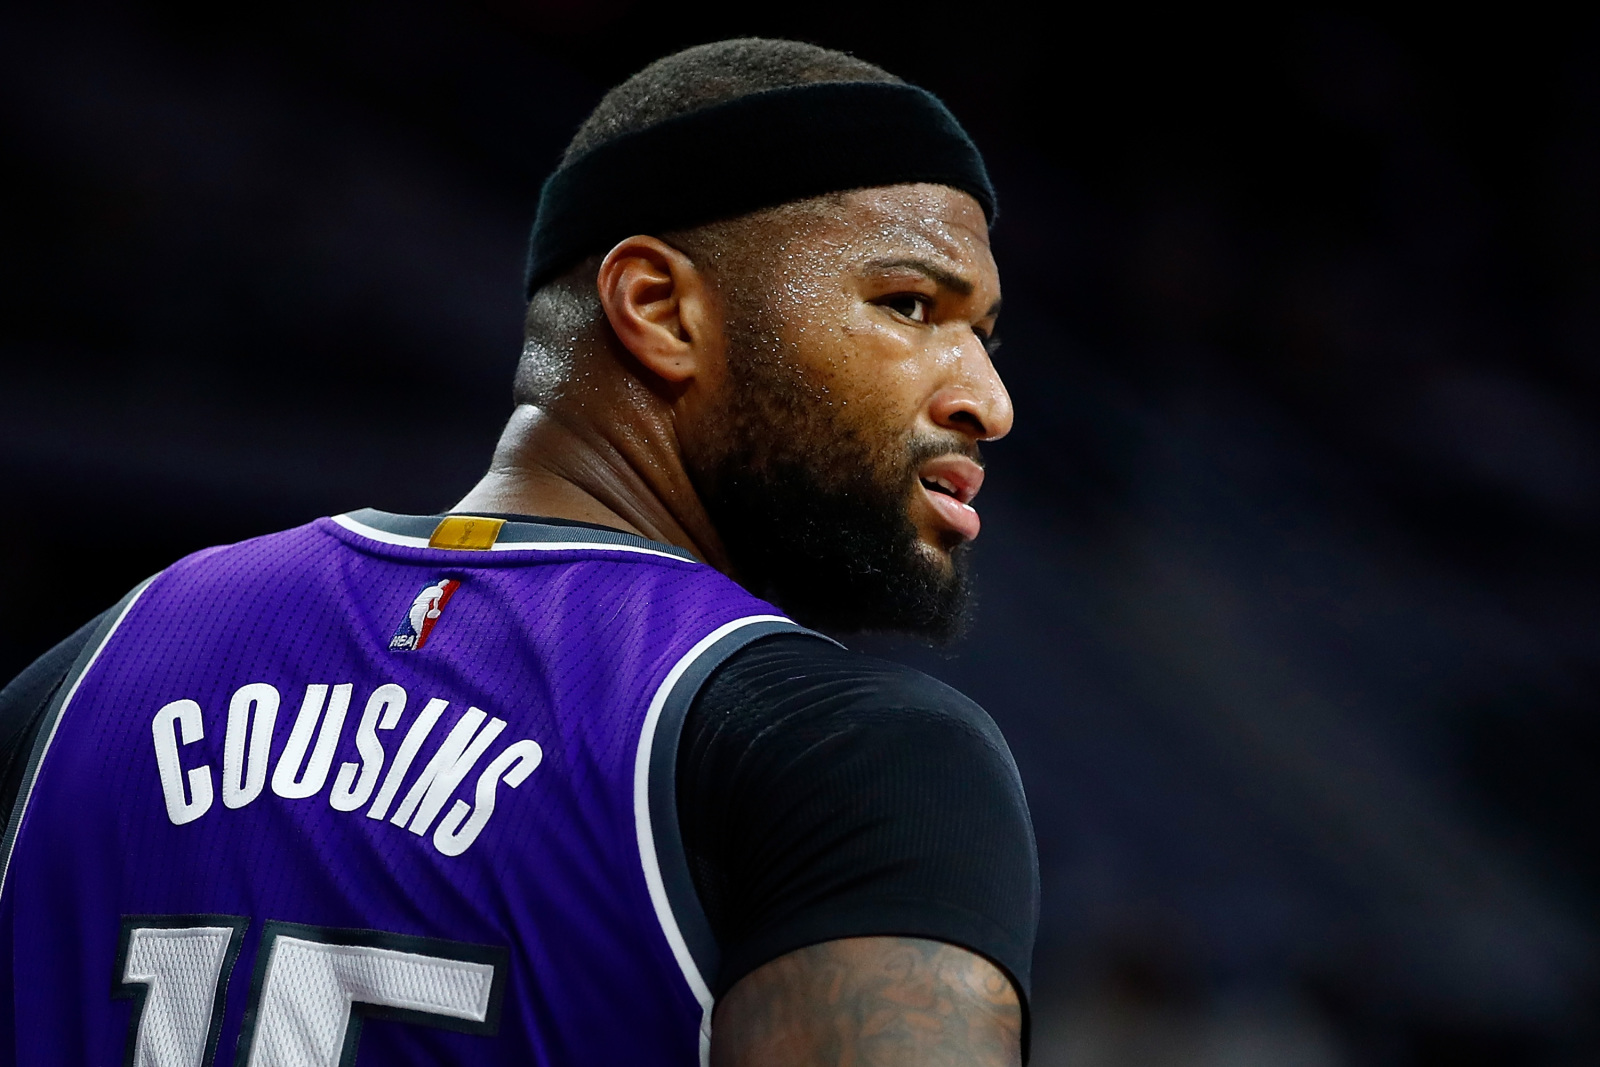 DeMarcus Cousins Gives Emotional Goodbye to Kings Fans After Trade